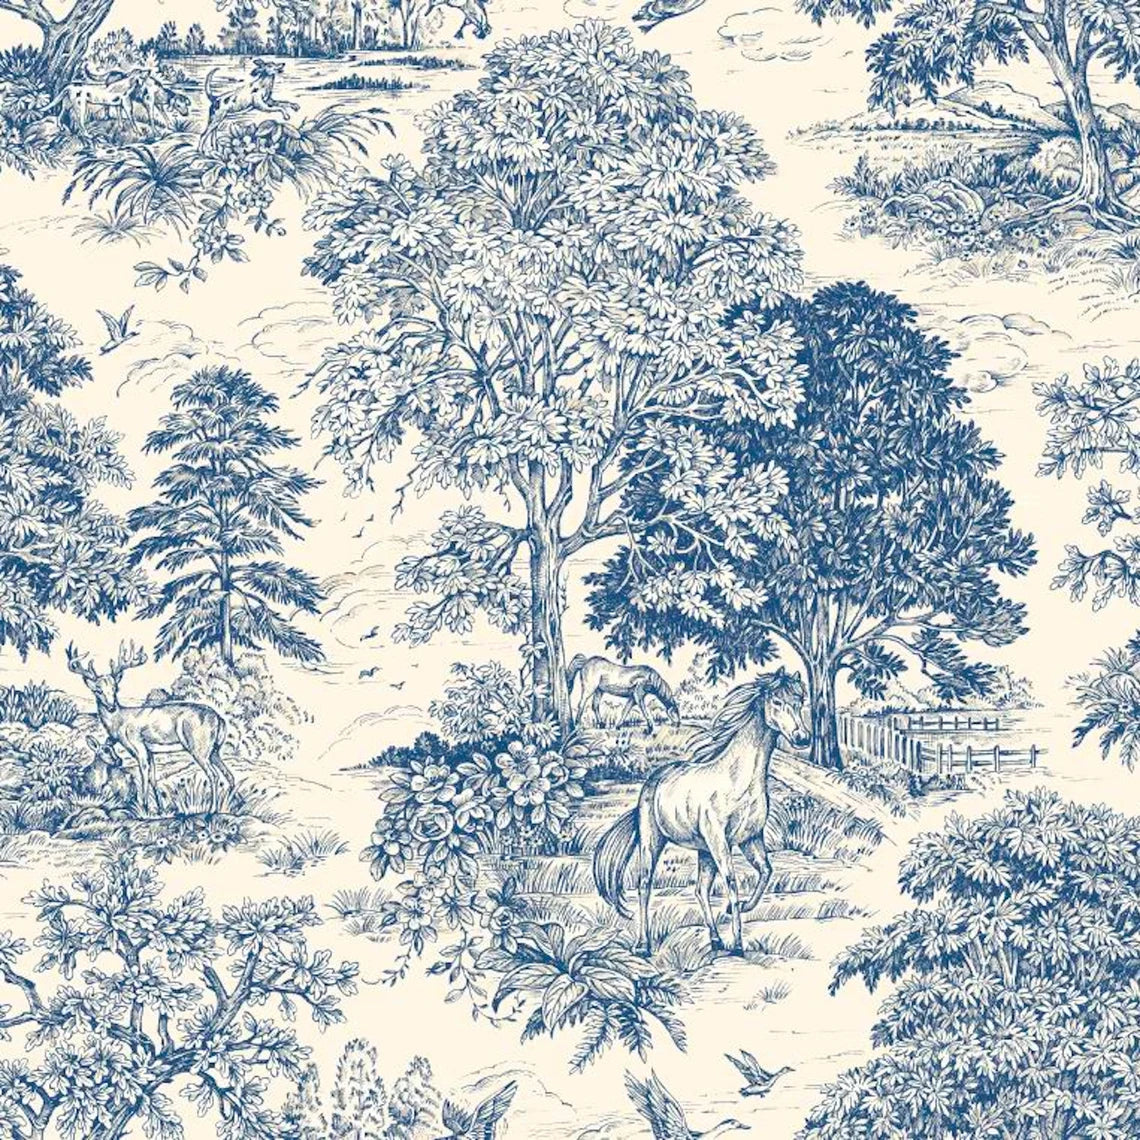 pillow sham in Yellowstone Bluebell Blue Country Toile- Horses, Deer, Dogs- Large Scale